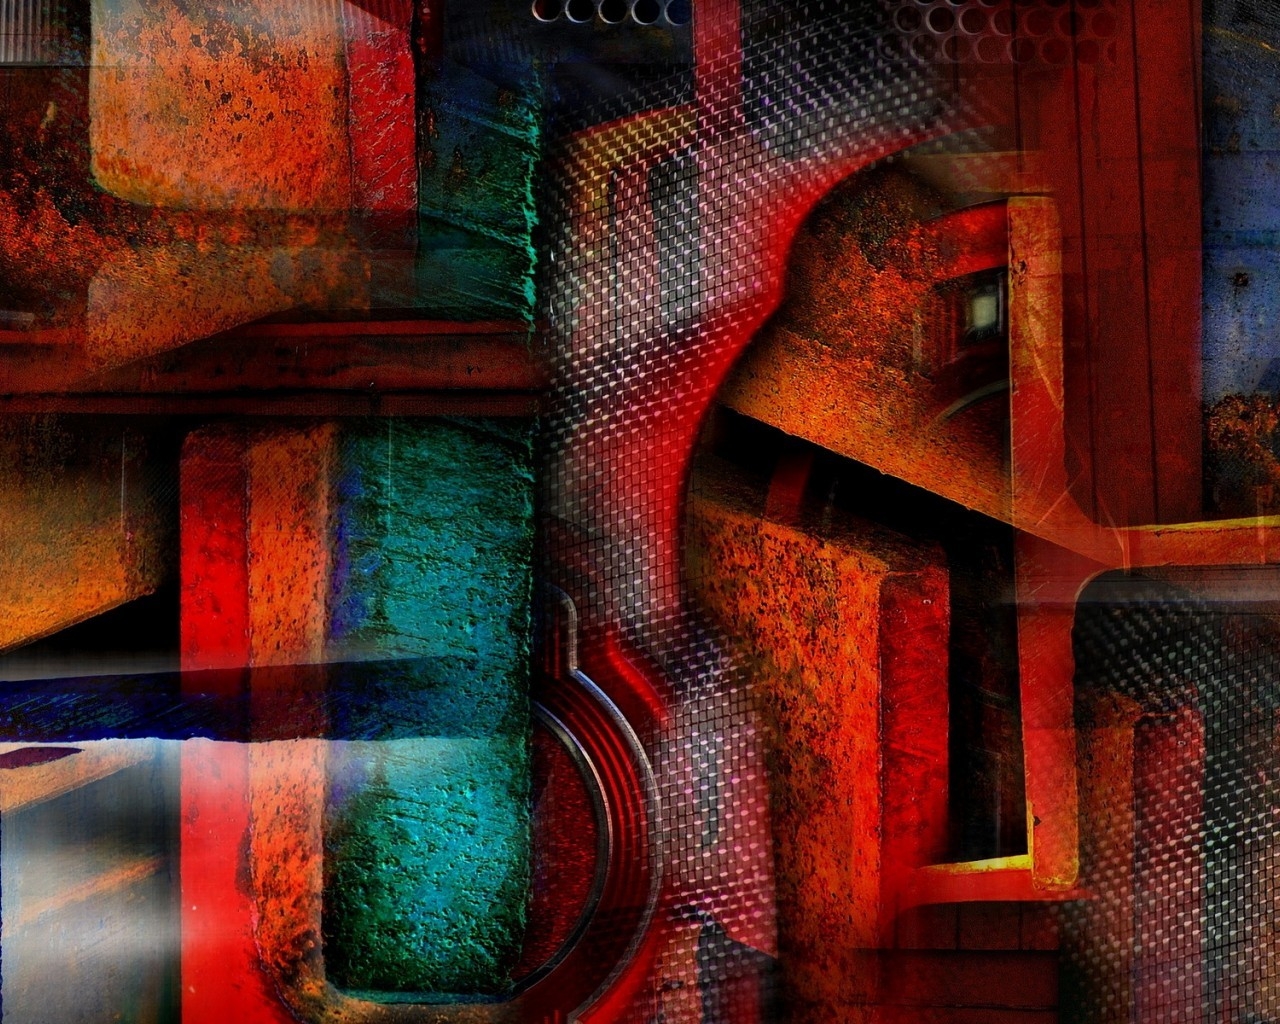 Abstract Grunge Art for 1280 x 1024 resolution